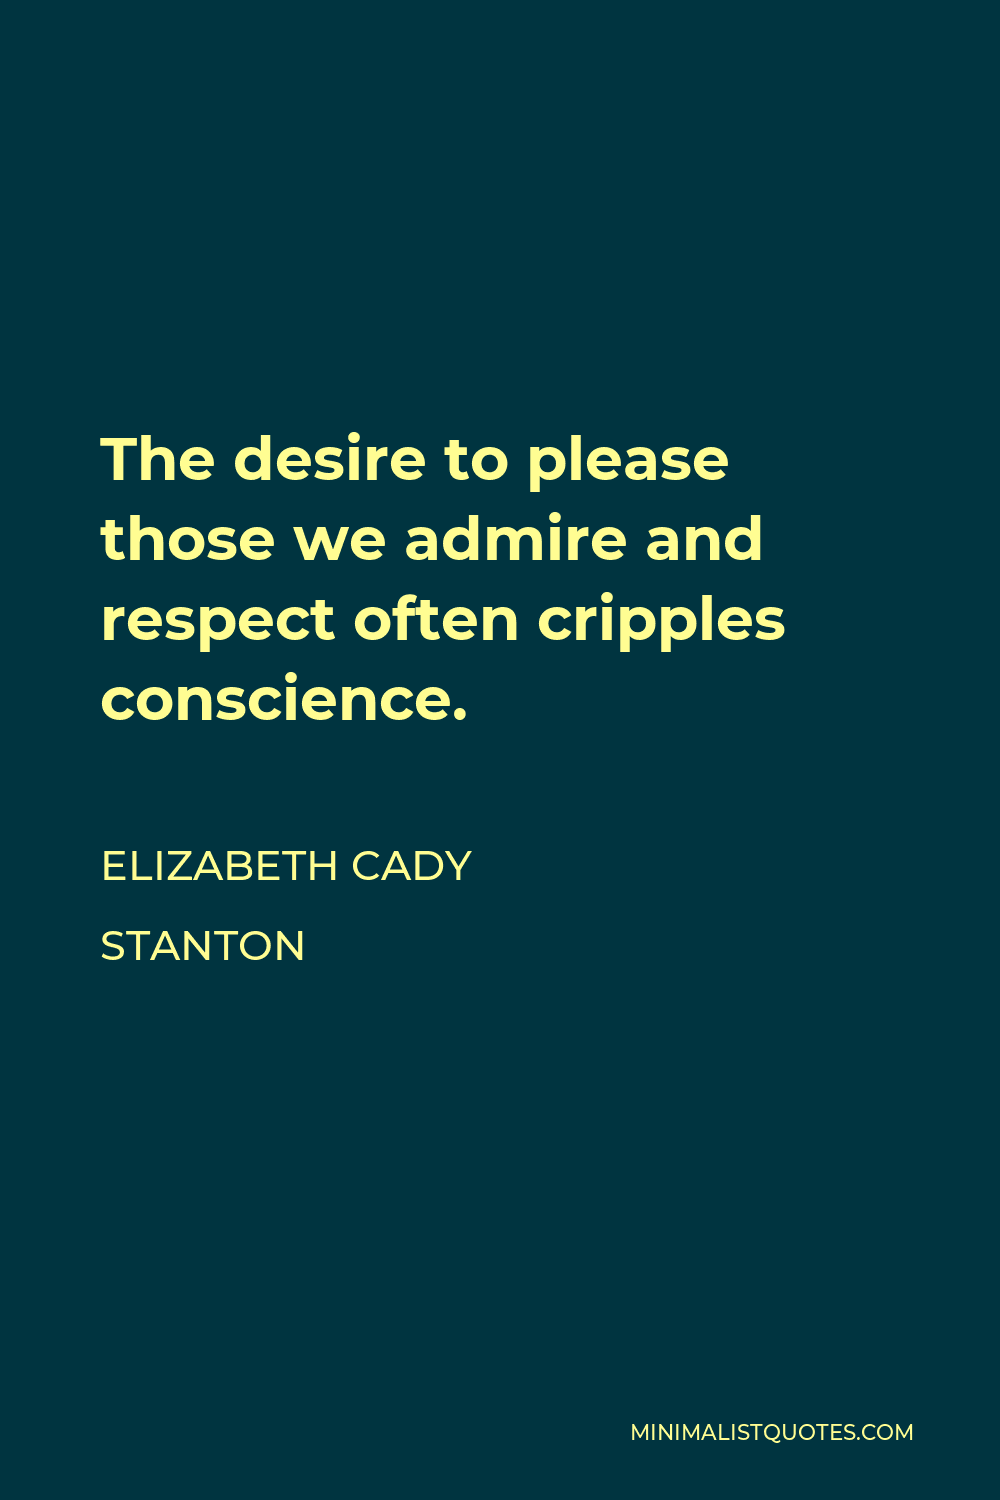 Elizabeth Cady Stanton Quote - The desire to please those we admire and respect often cripples conscience.